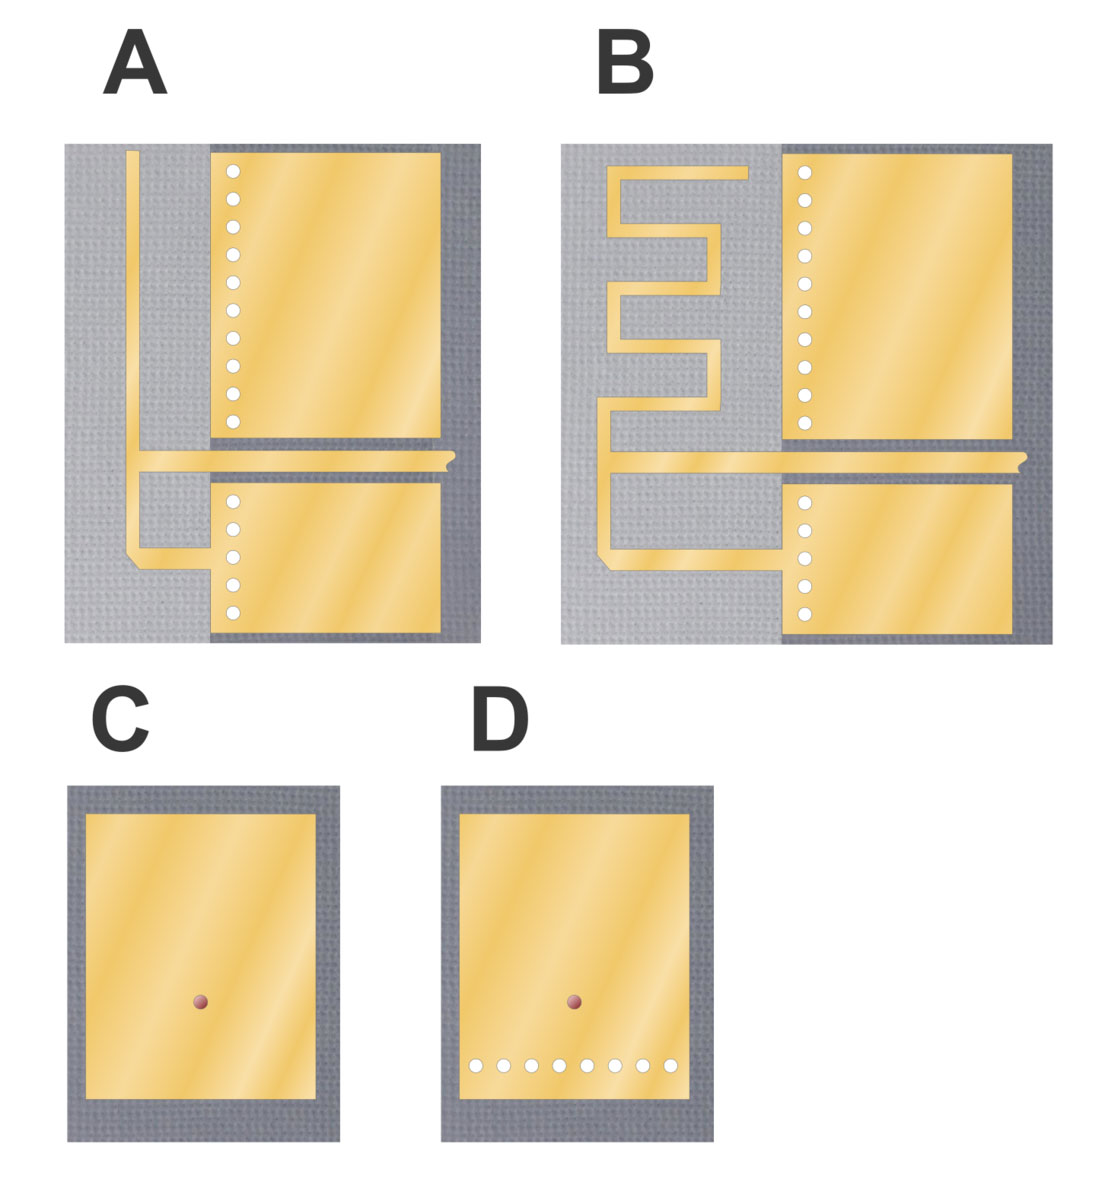 Different types of PCB antennas. Note the inverted F-type (IFA) and MIFA types in pictures A and B, respectively